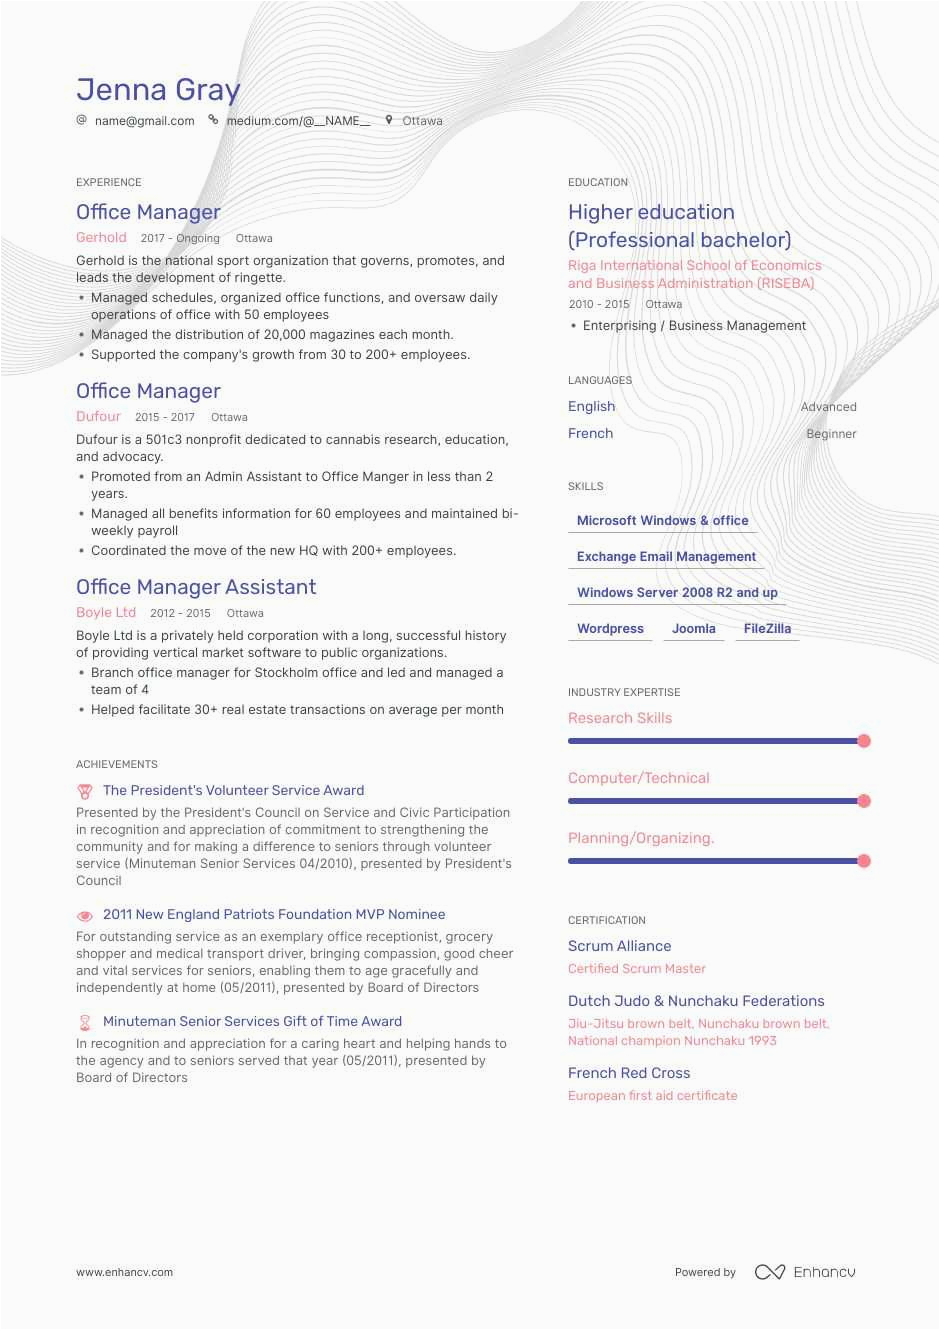 Resume Sample for An Experienced Office Manager 8 Fice Manager Resume Samples that are Sure to Stand Out